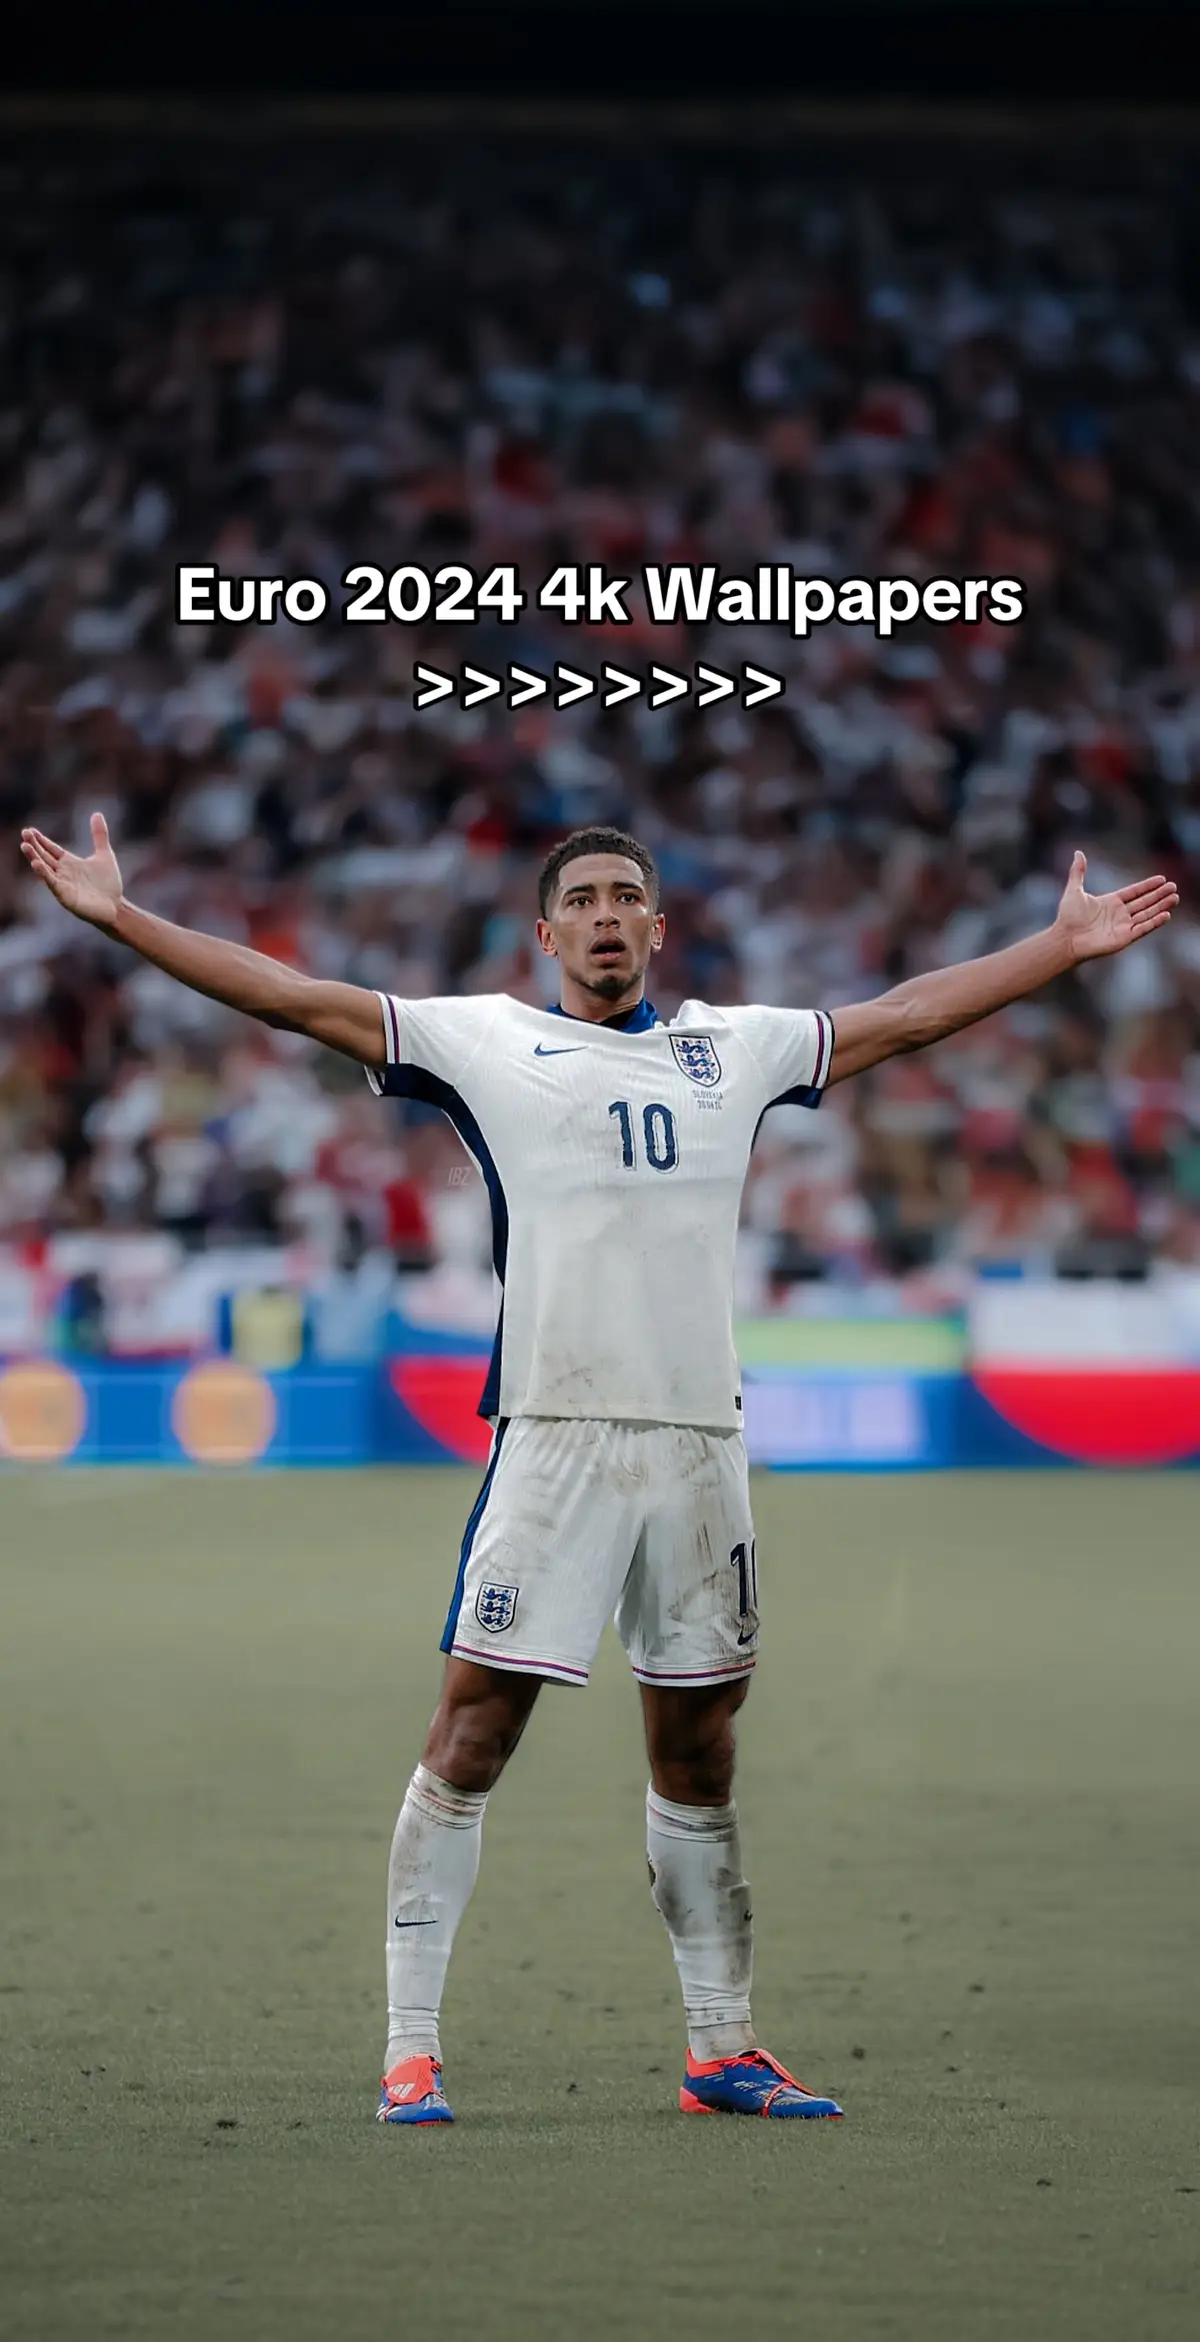 Euro 2024 4k Wallpapers🤤😍 #yerseq #football #fyp #viral #foryou 